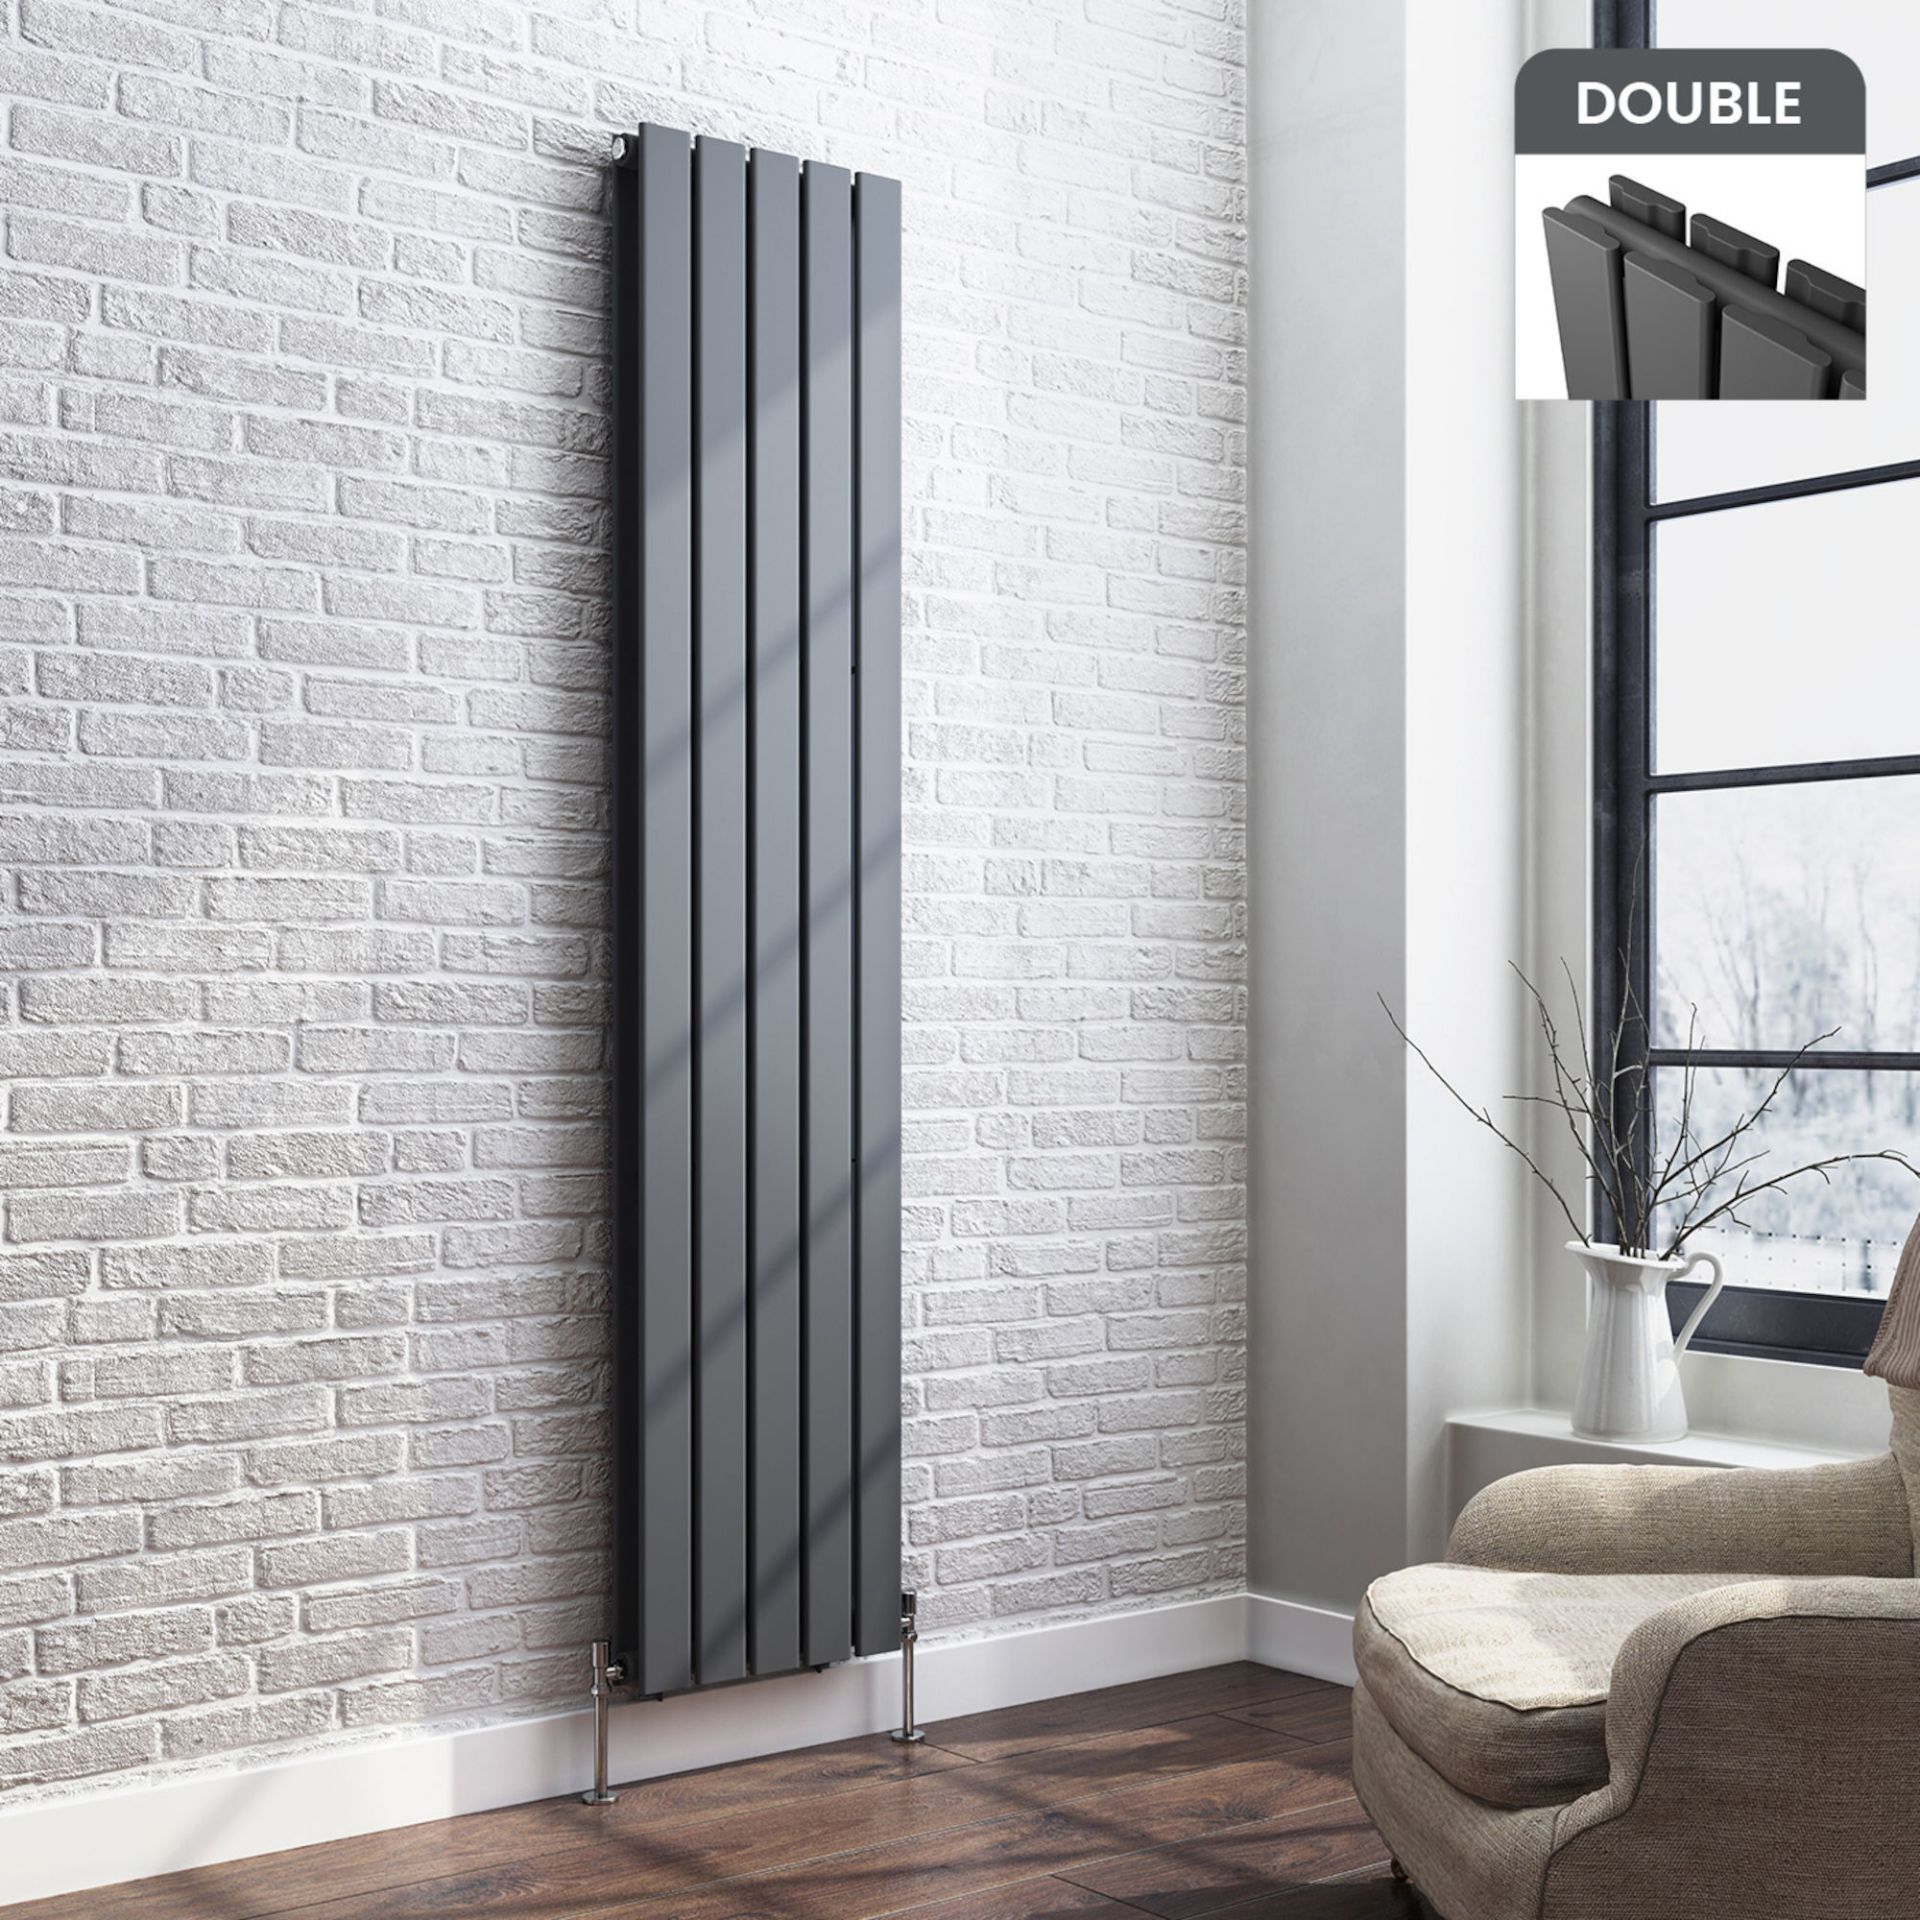 (OS53) 1800x376mm Anthracite Double Flat Panel Vertical Radiator. RRP £349.99. Made with low